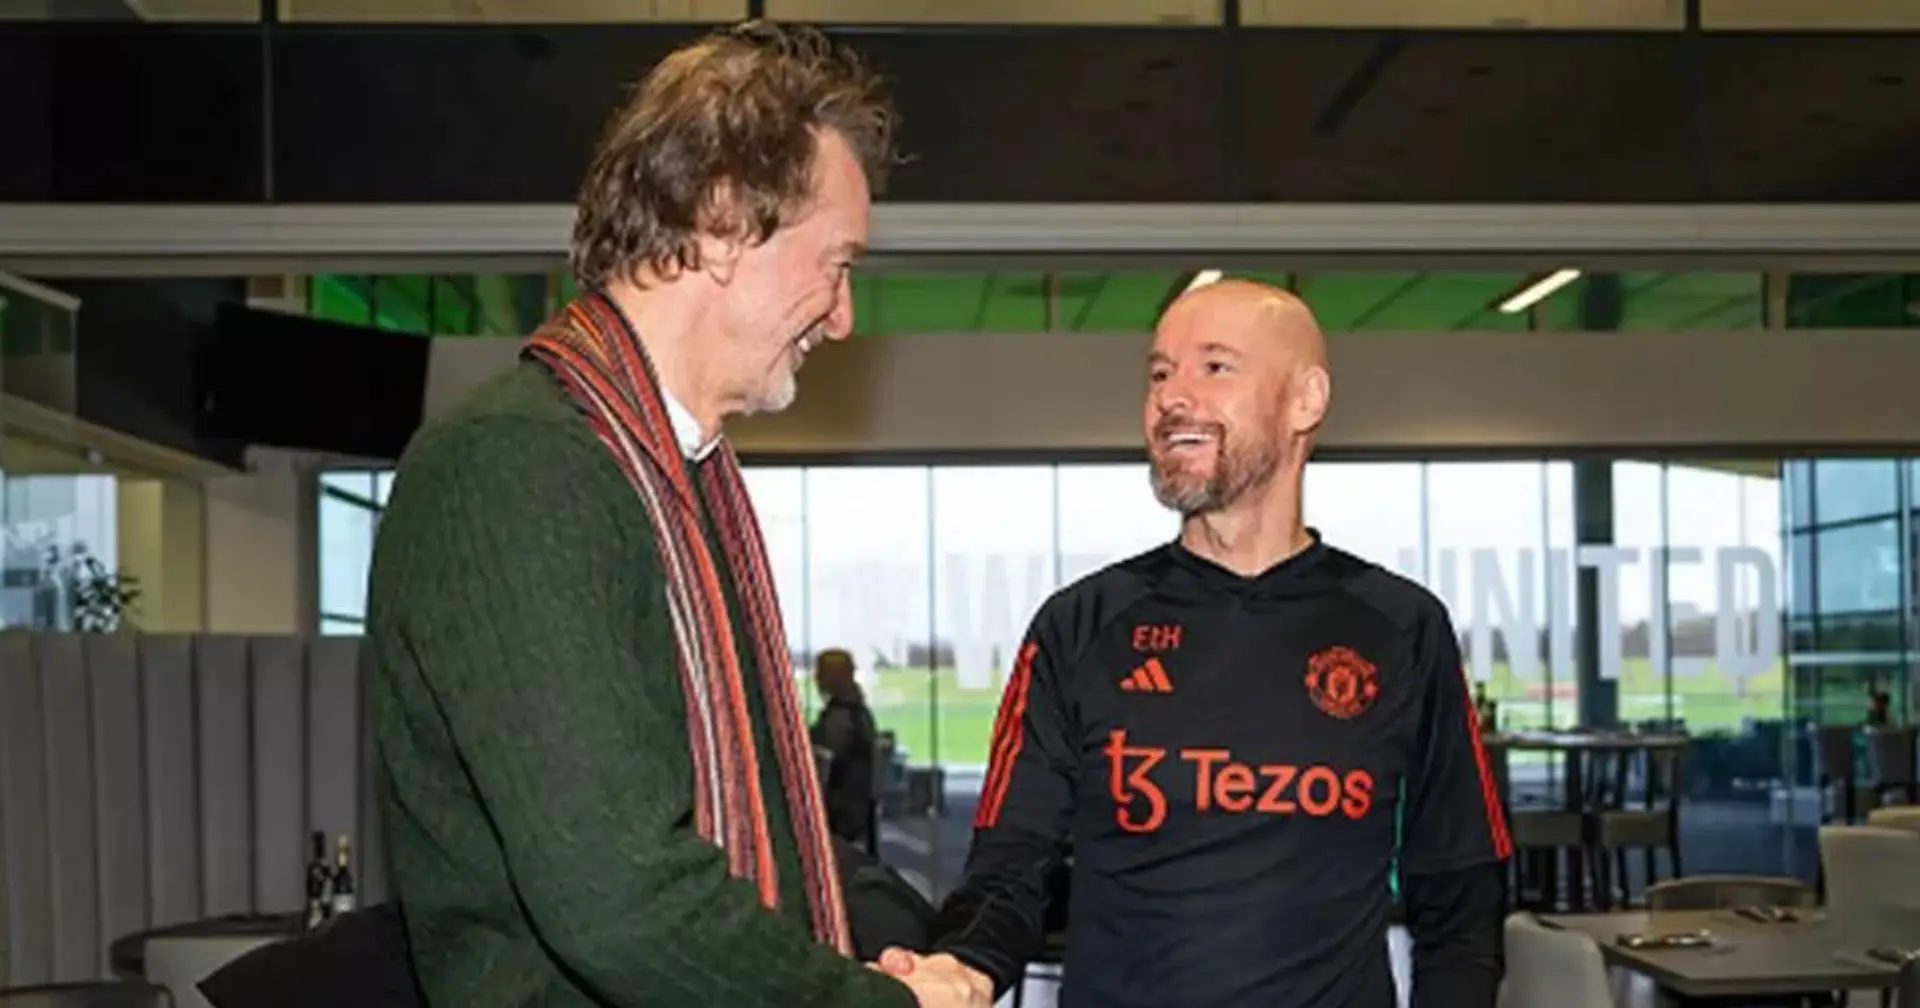 Revealed: Why INEOS prefer Ten Hag to stay as manager